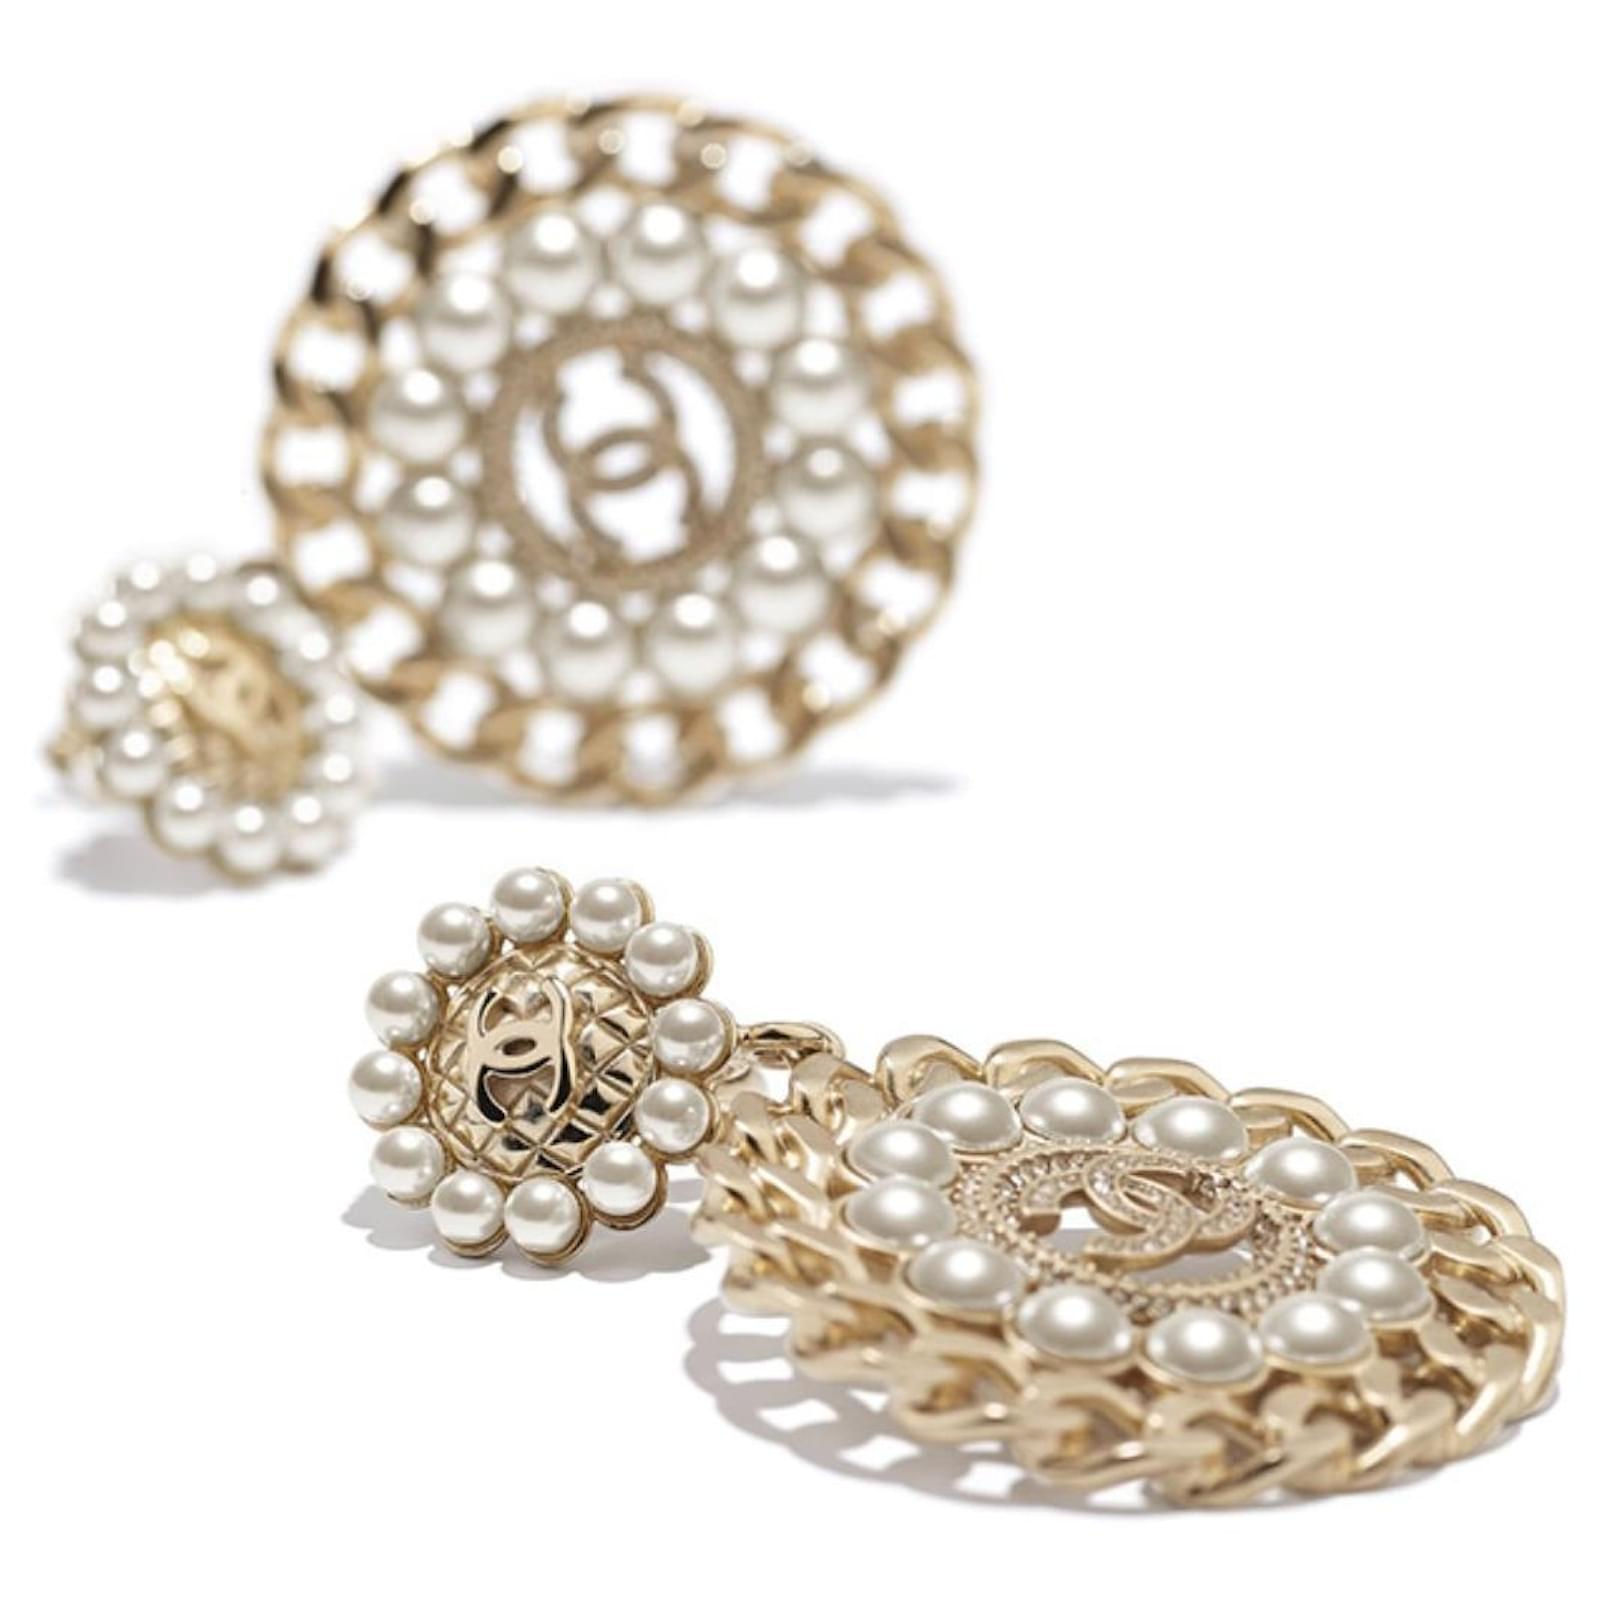 Chanel XL Stud Earrings with Pearls & Strass